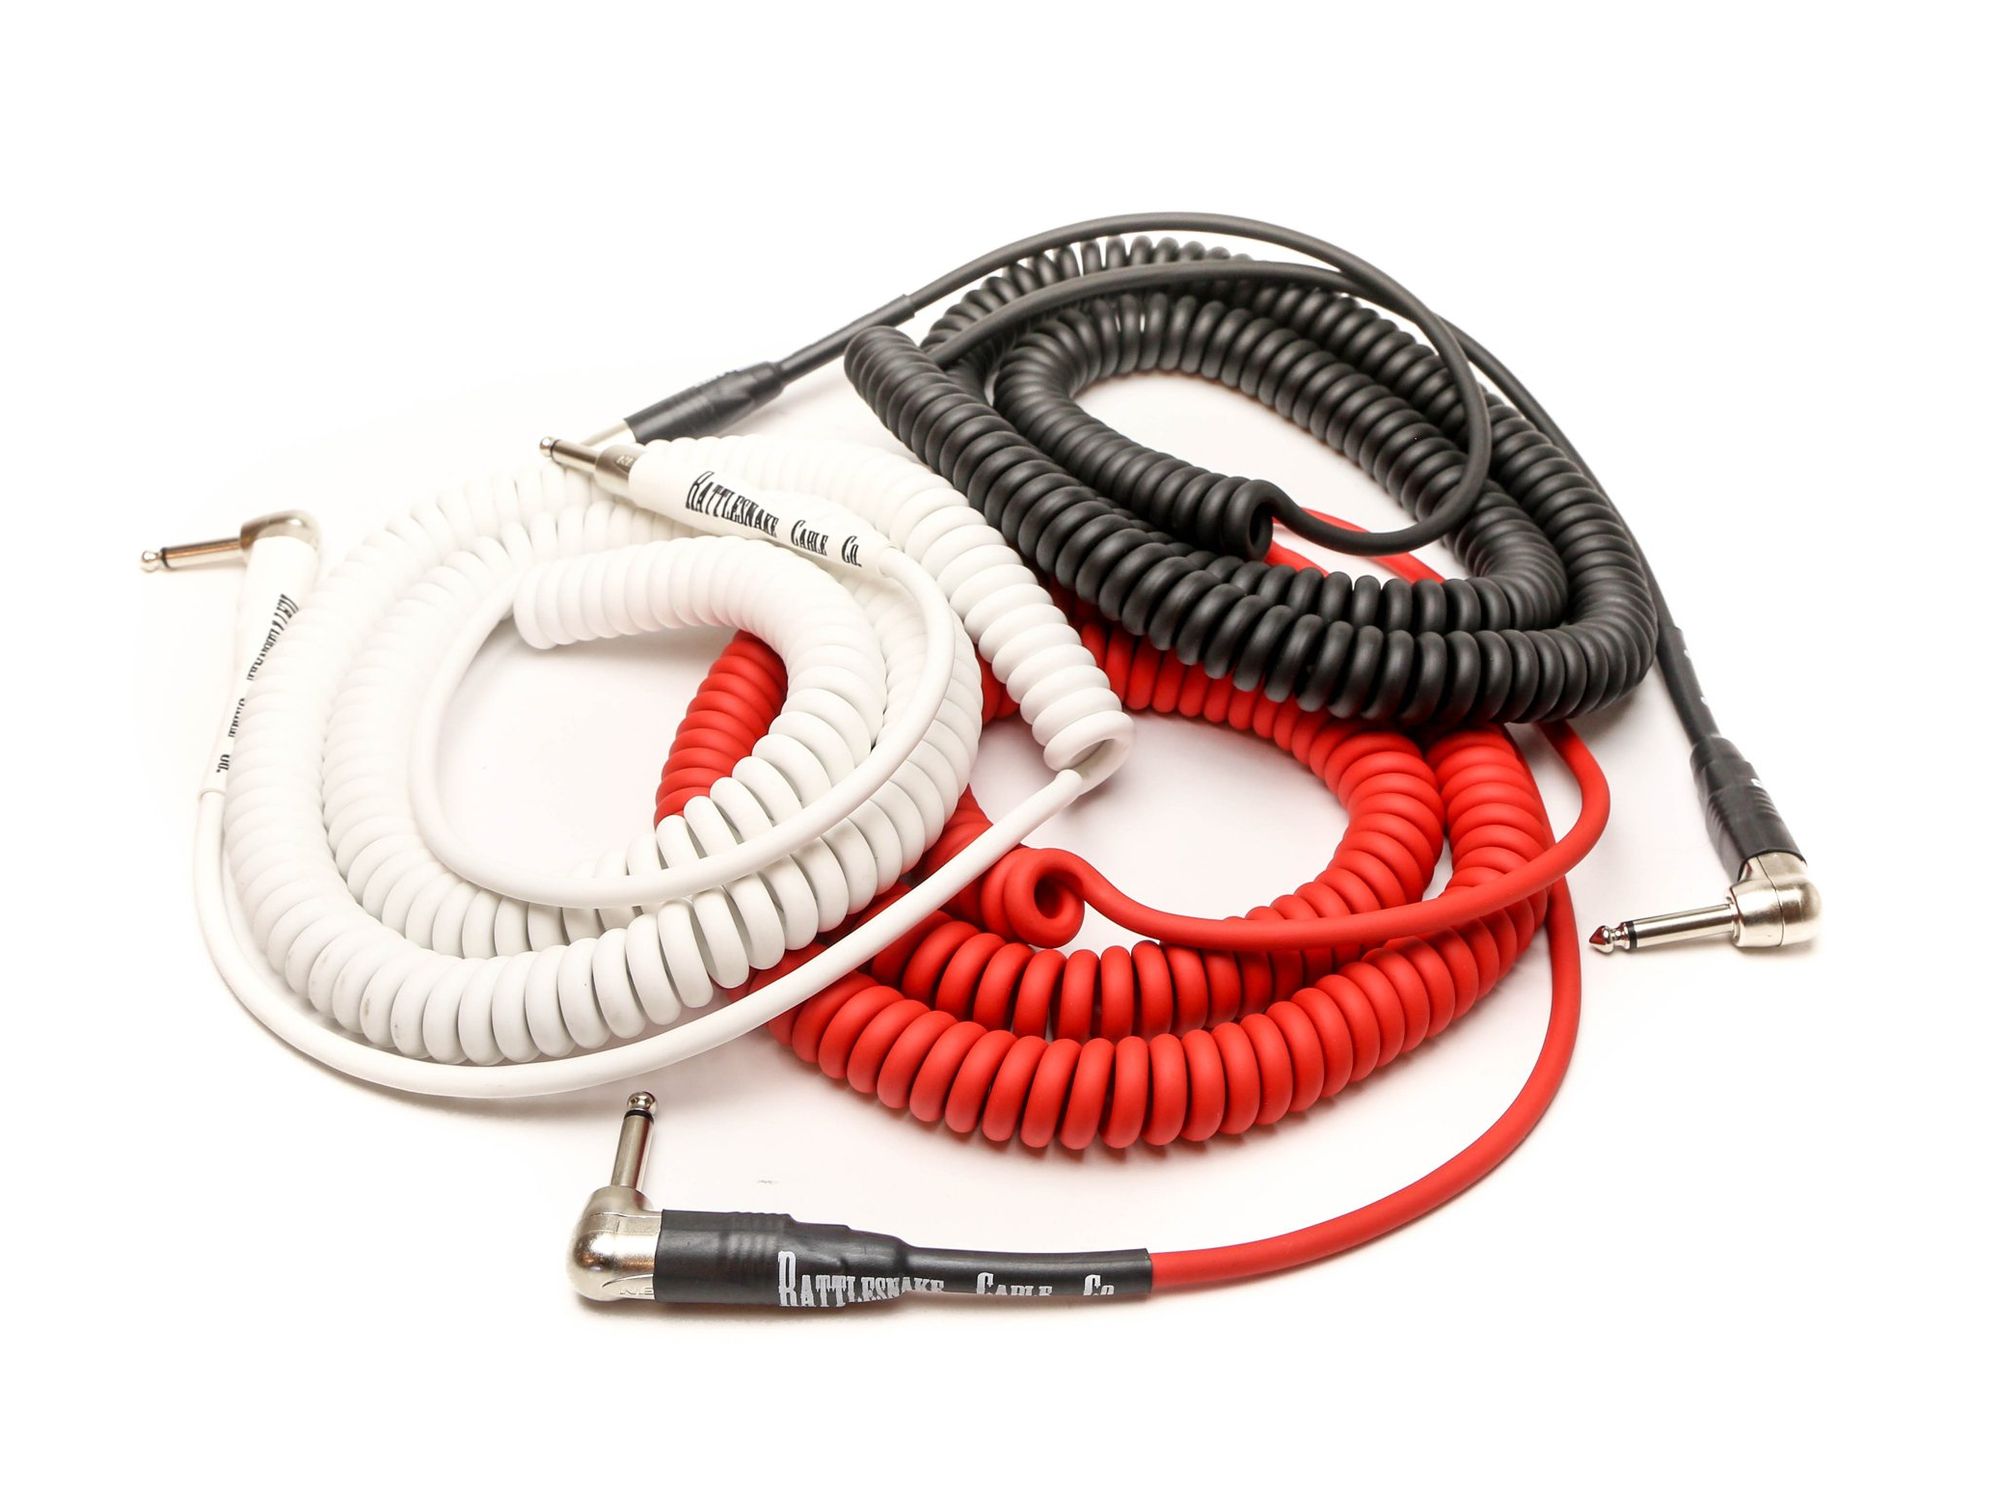 Rattlesnake Cable Company Introduces Retro Coily Cables